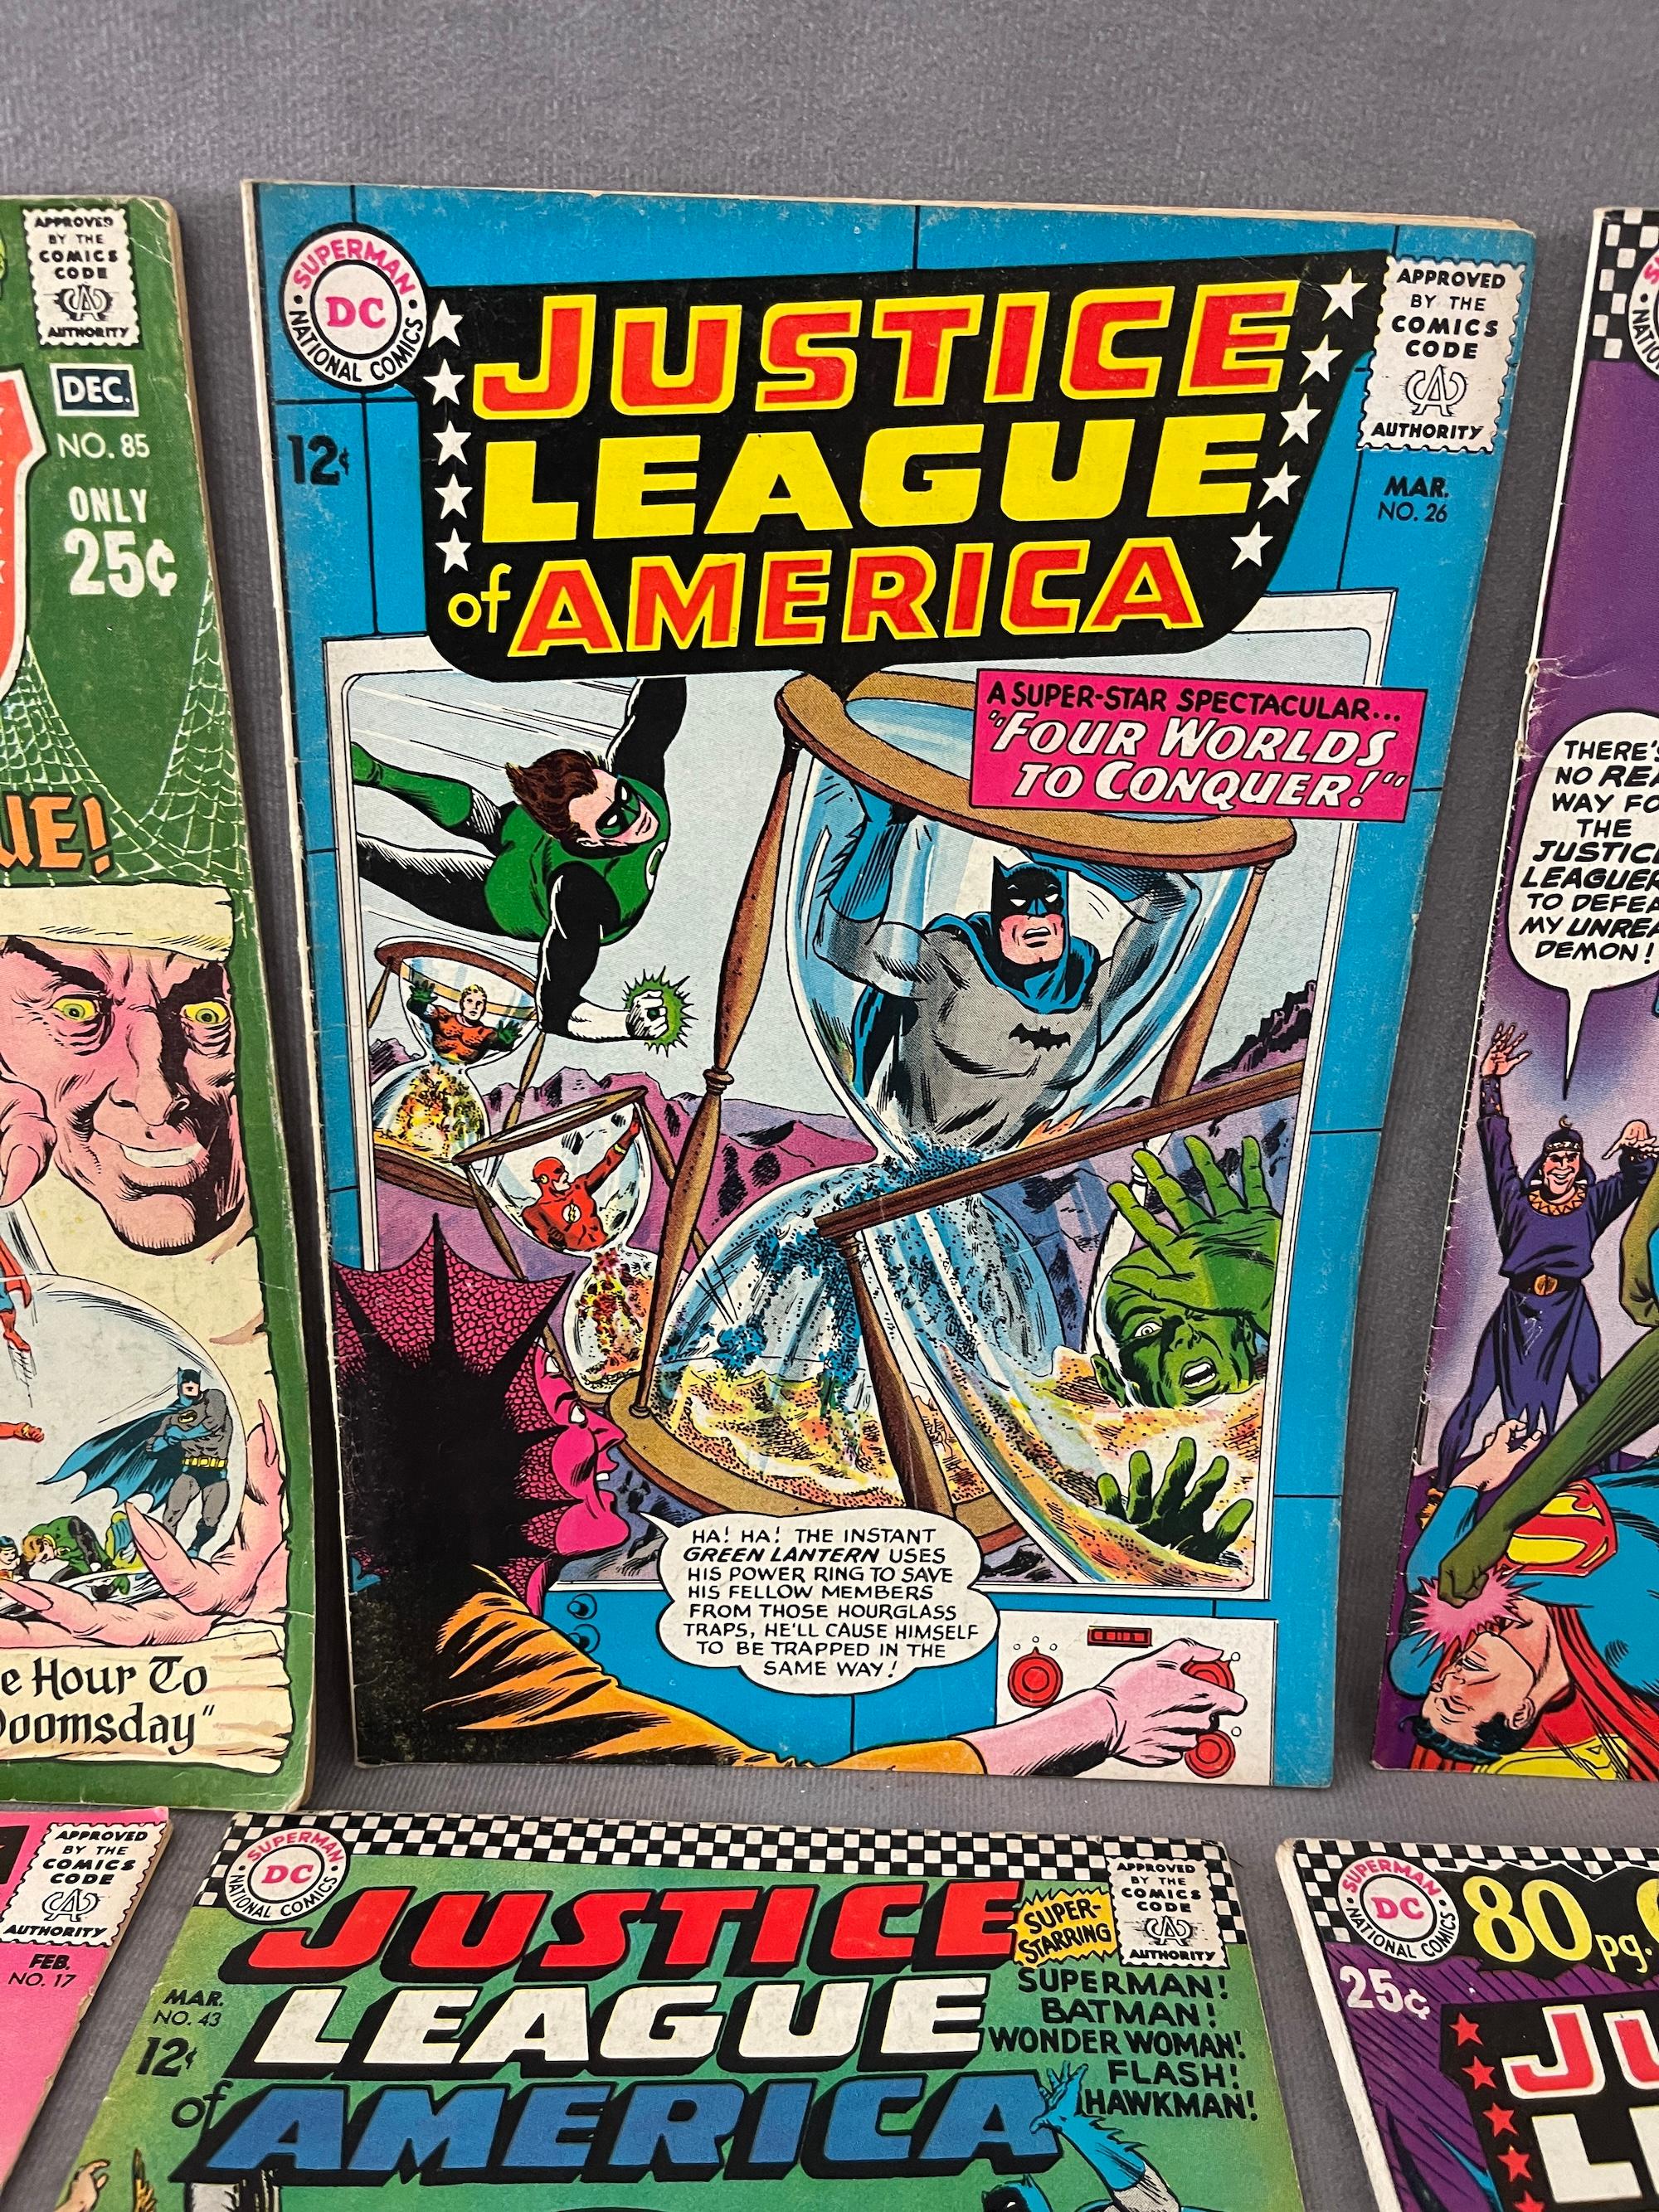 VINTAGE COMIC BOOK COLLECTION JUSTICE LEAGUE OF AMERICA 26, 49, 85, 48,43, 17 LOT 6